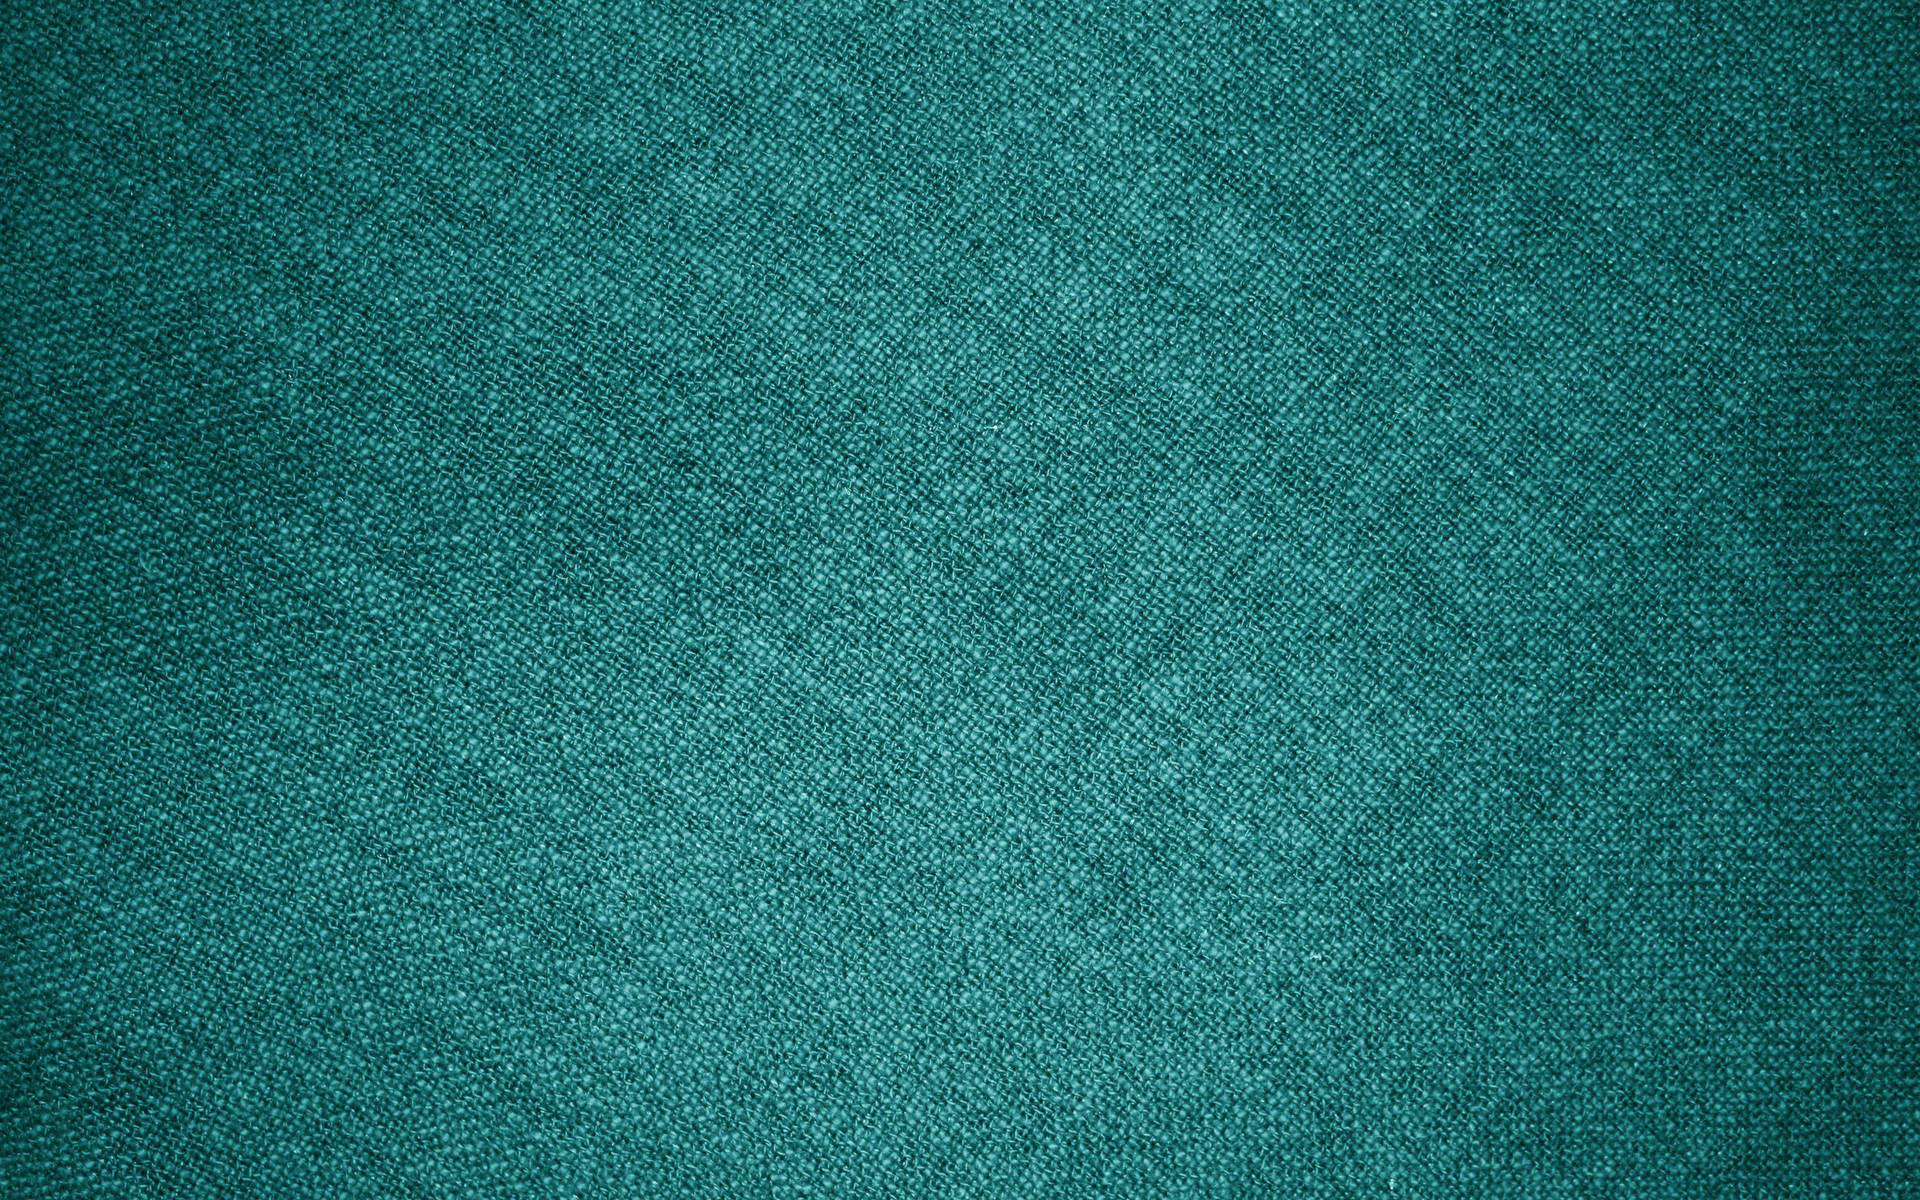 Textured Green Cotton Fabric Background